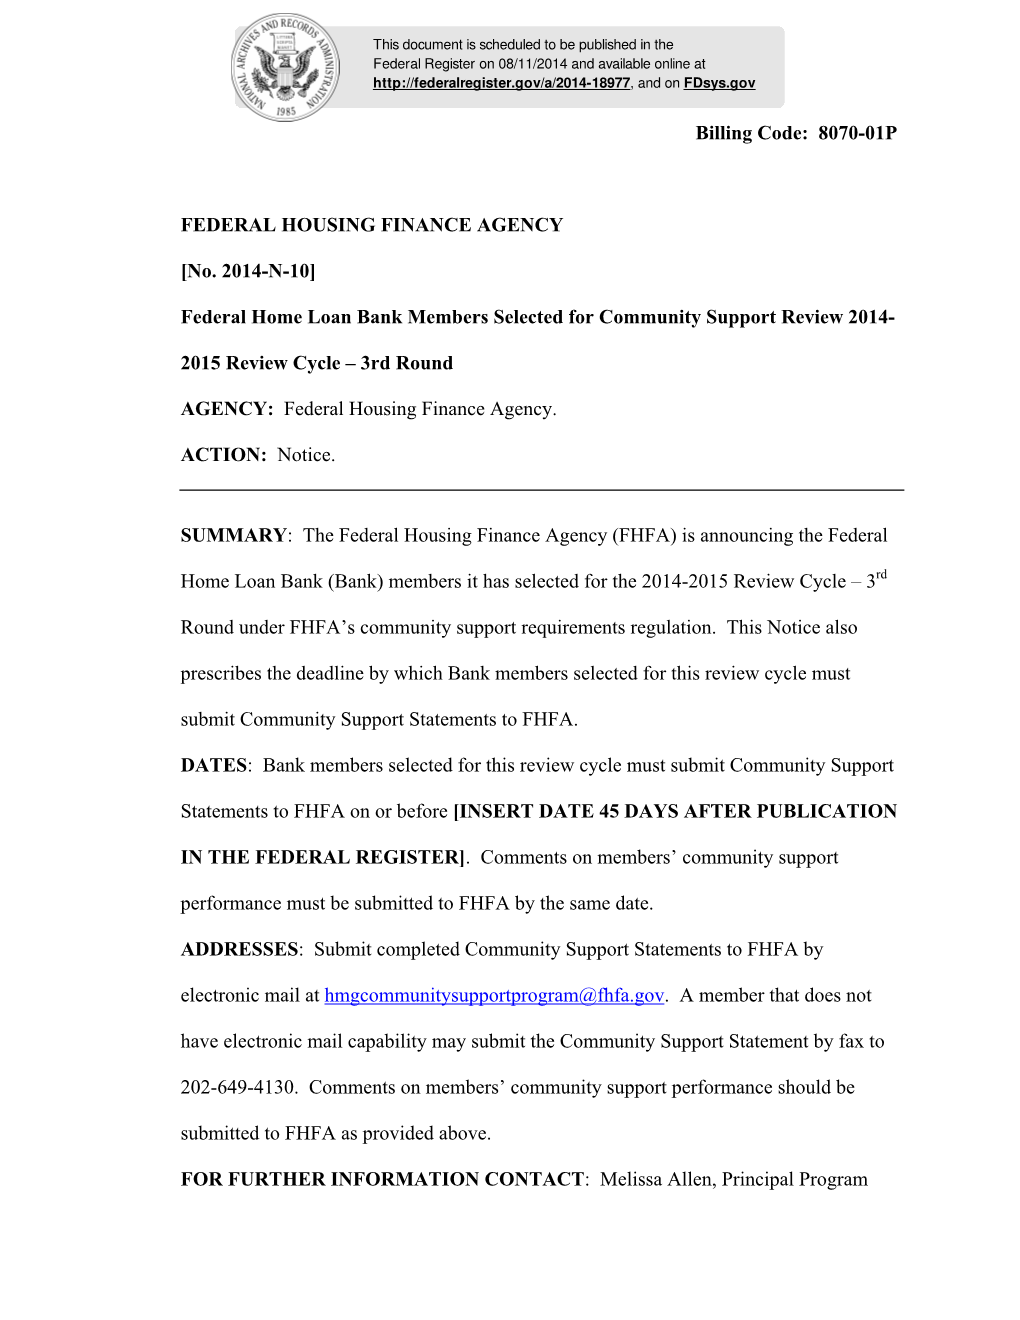 Federal Home Loan Bank Members Selected for Community Support Review 2014